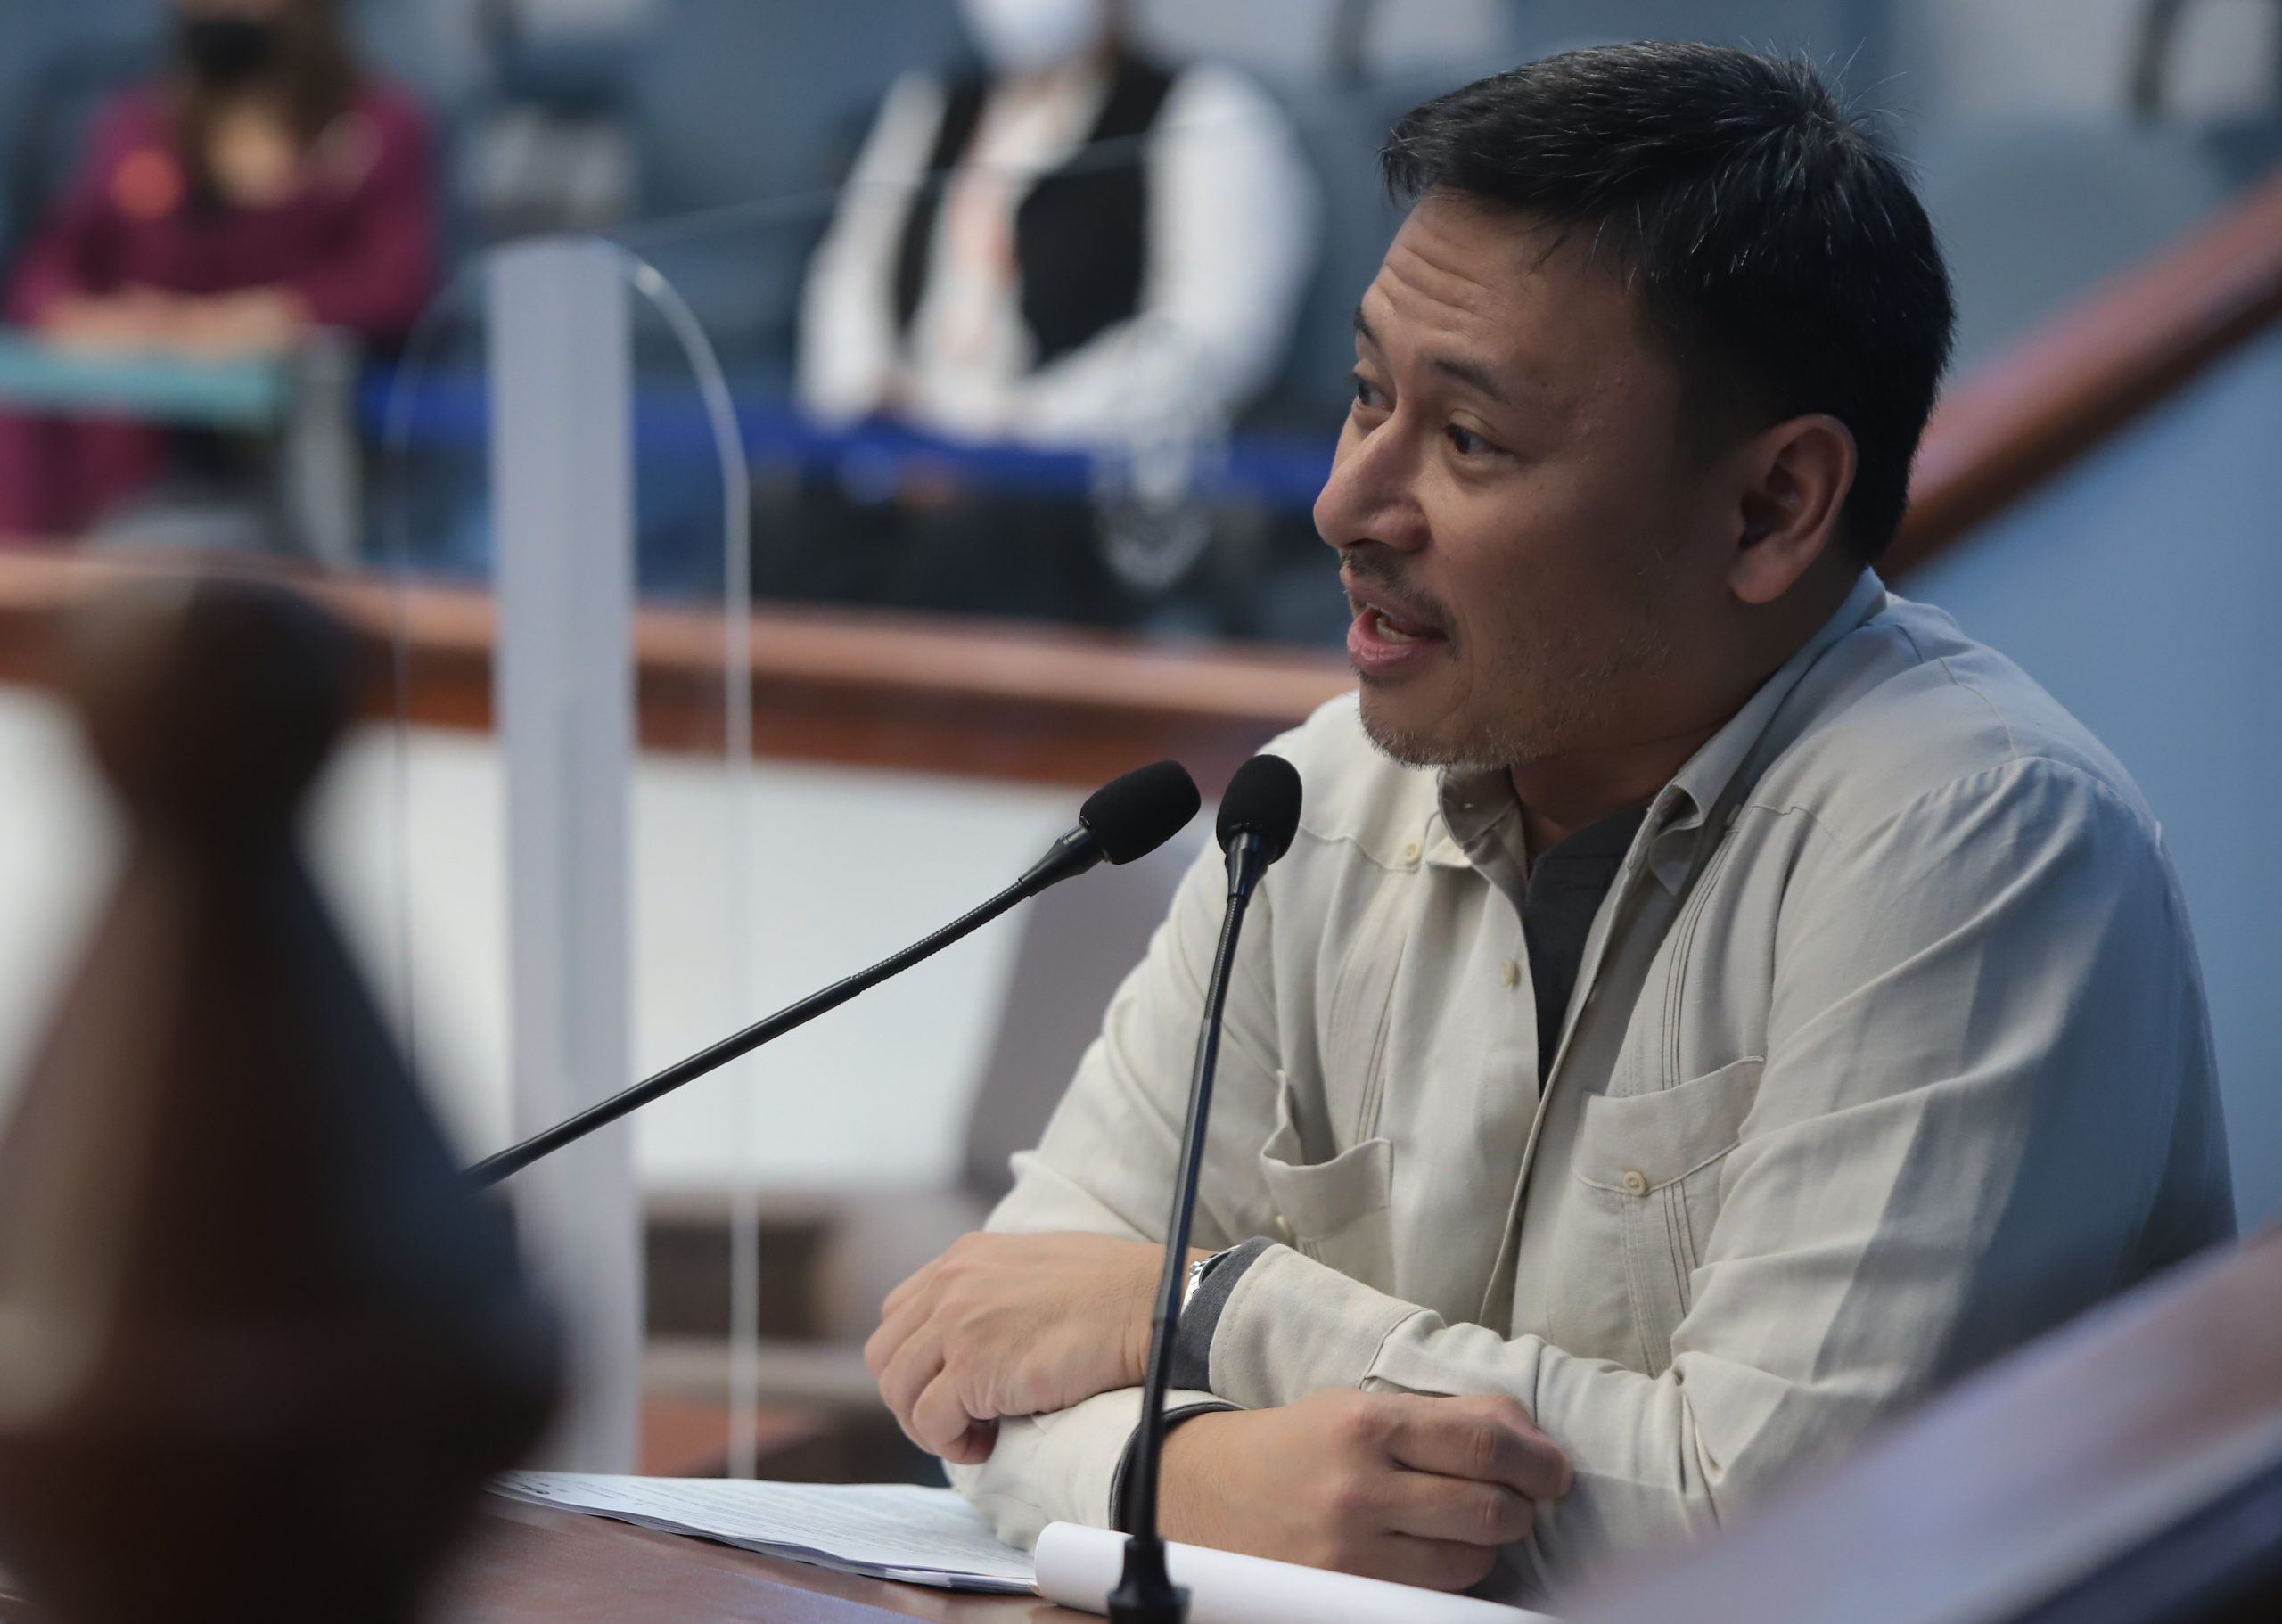 The government should convert the facilities that were previously used as quarantine centers into evacuation areas as the number of COVID-19 cases in the country had already significantly dropped, Sen. Juan Edgardo Angara said on Friday.